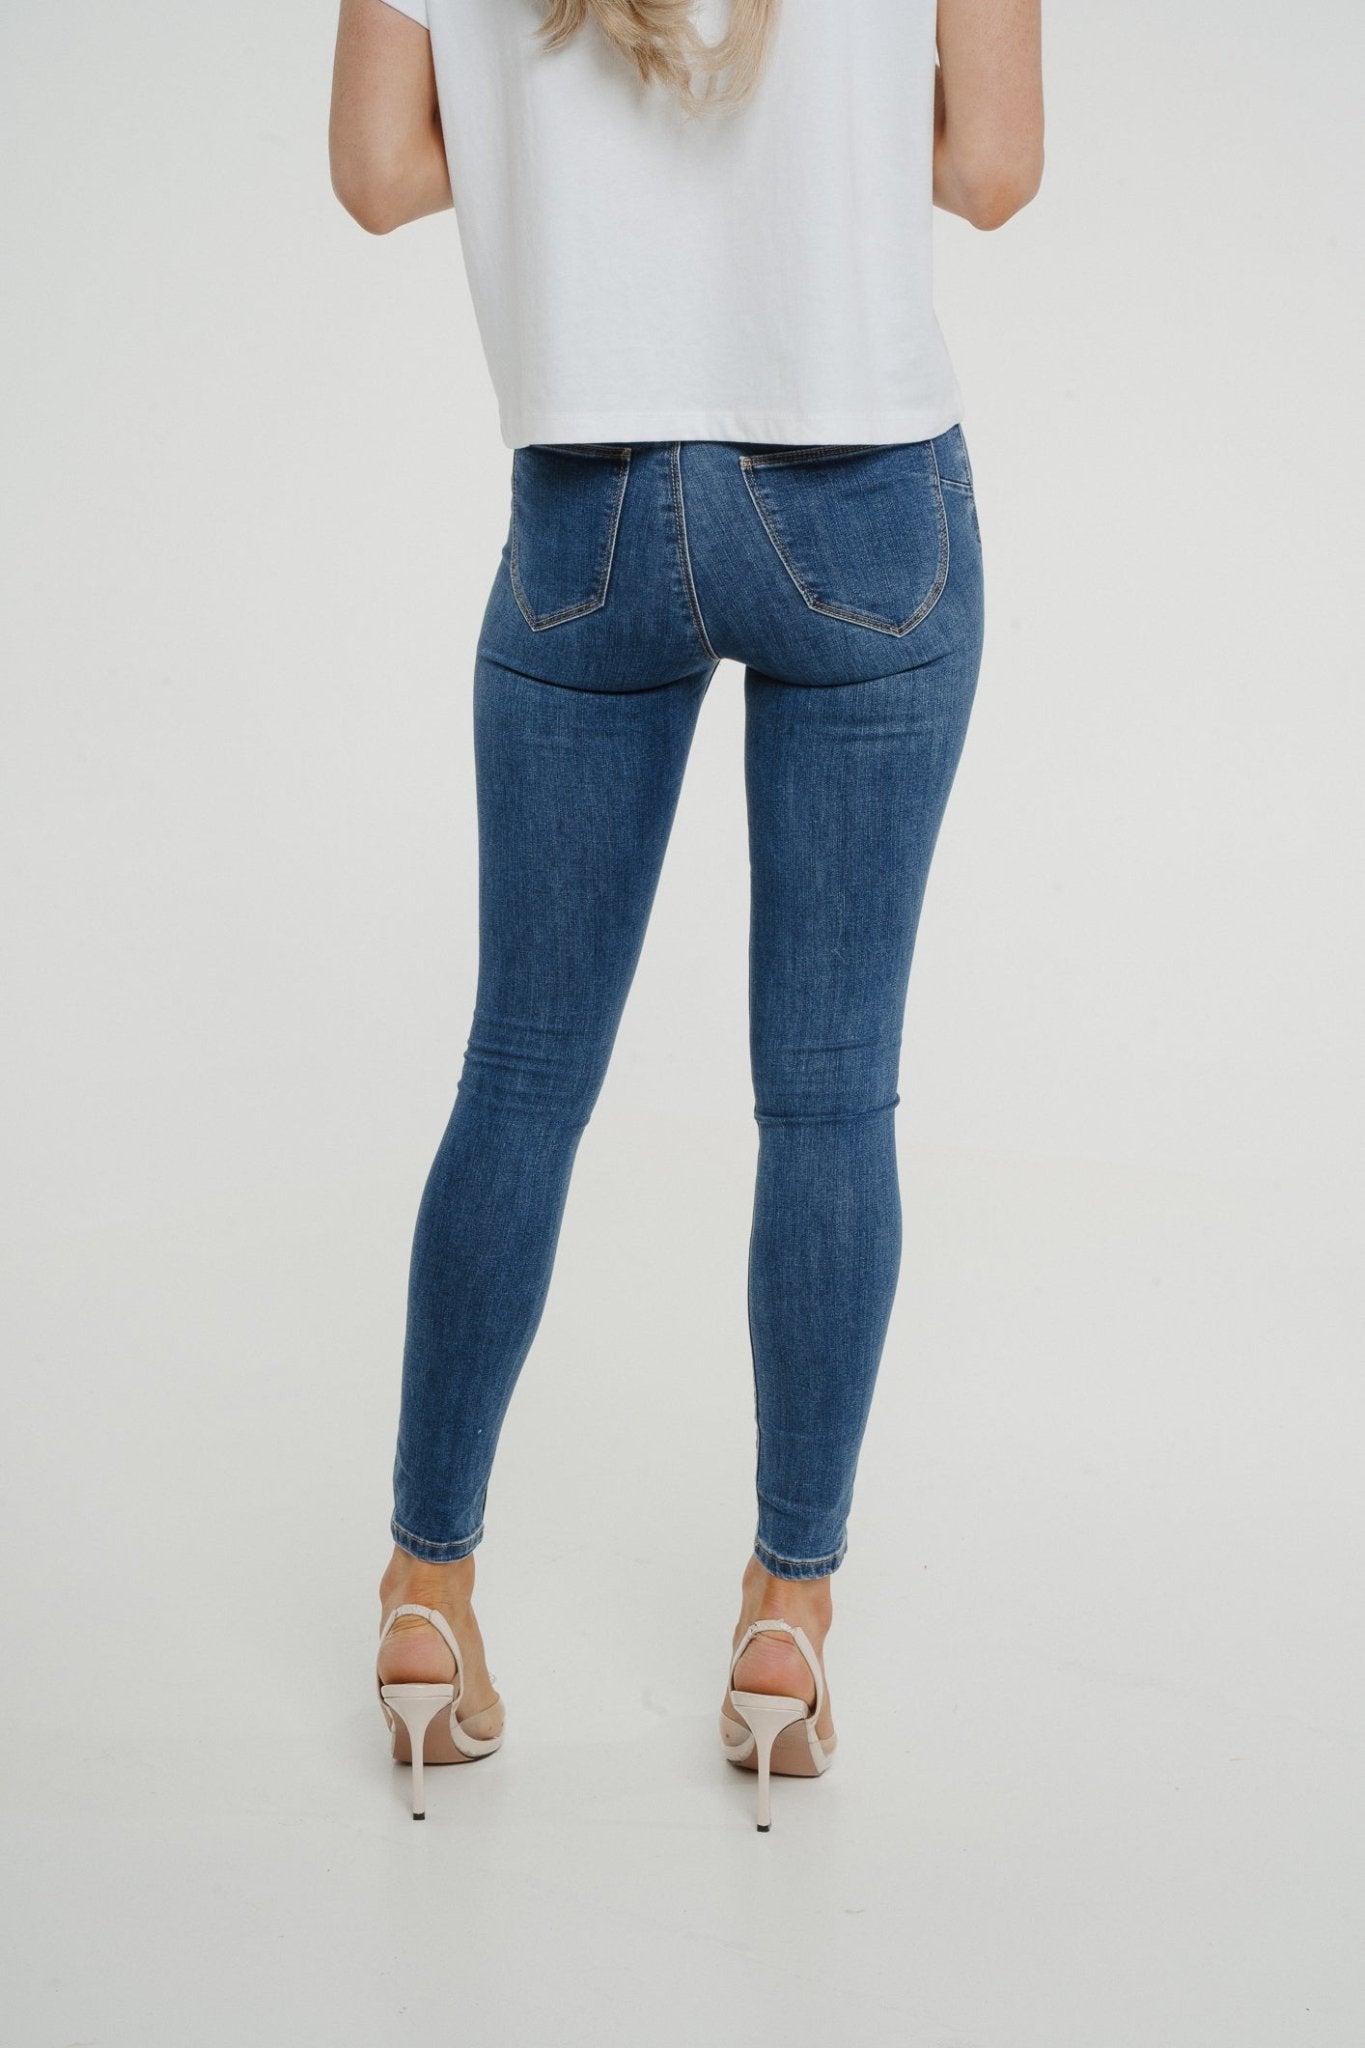 Cindy Bum Lift Jeans In Mid Wash - The Walk in Wardrobe